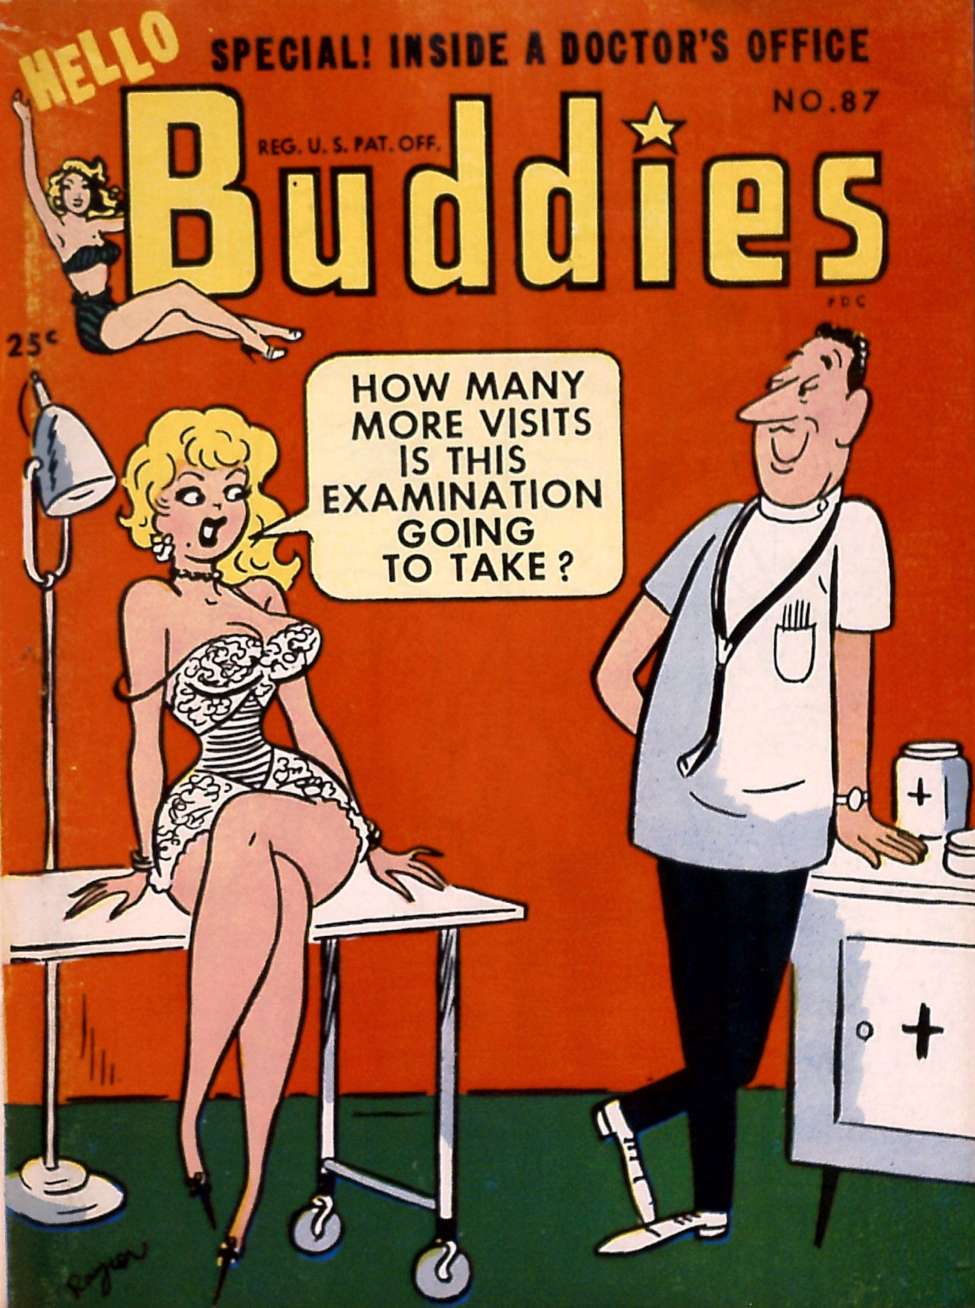 Book Cover For Hello Buddies 87